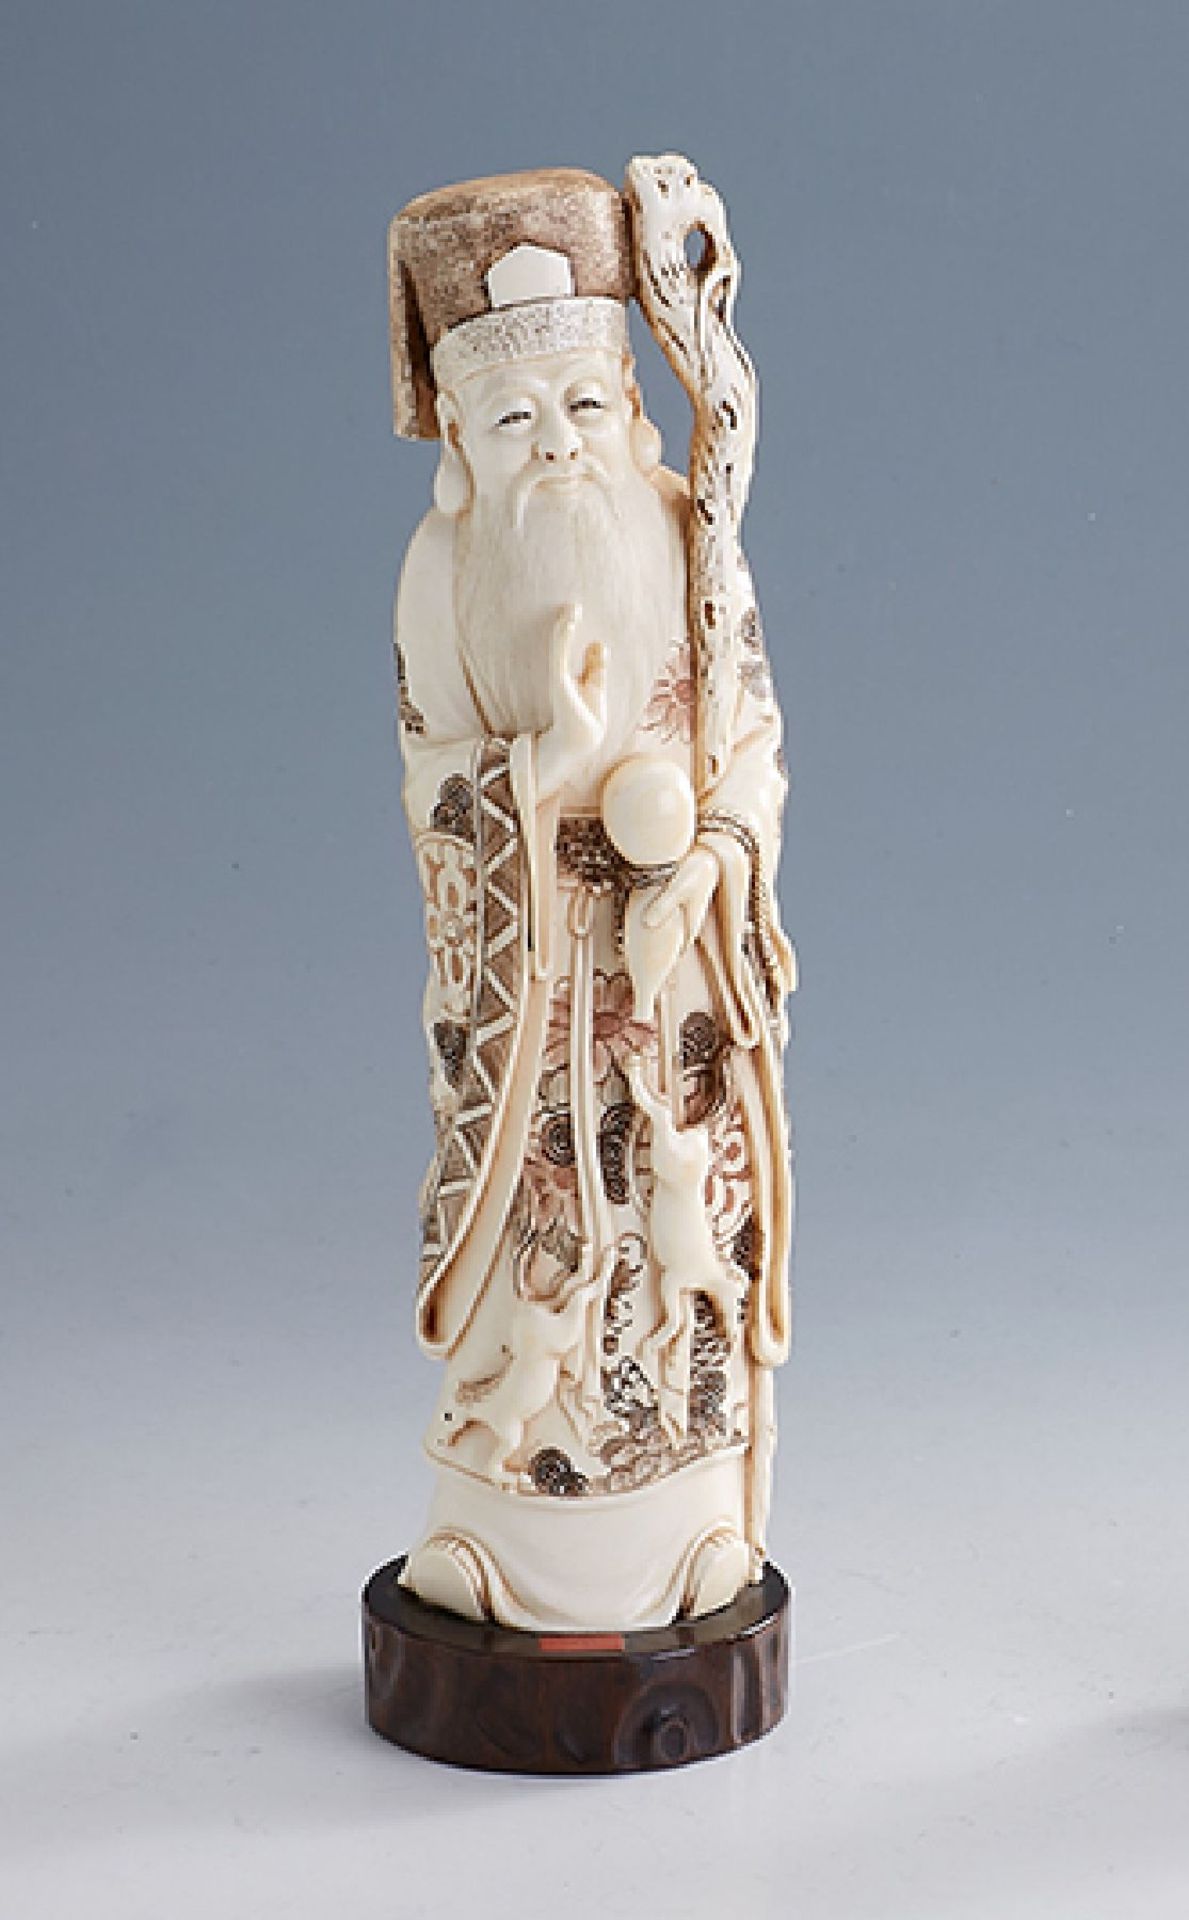 Ivory sculpture "Lao Tzu", China approx. 1870/80, Lao Tzu with crosier and drinking vessel, fine